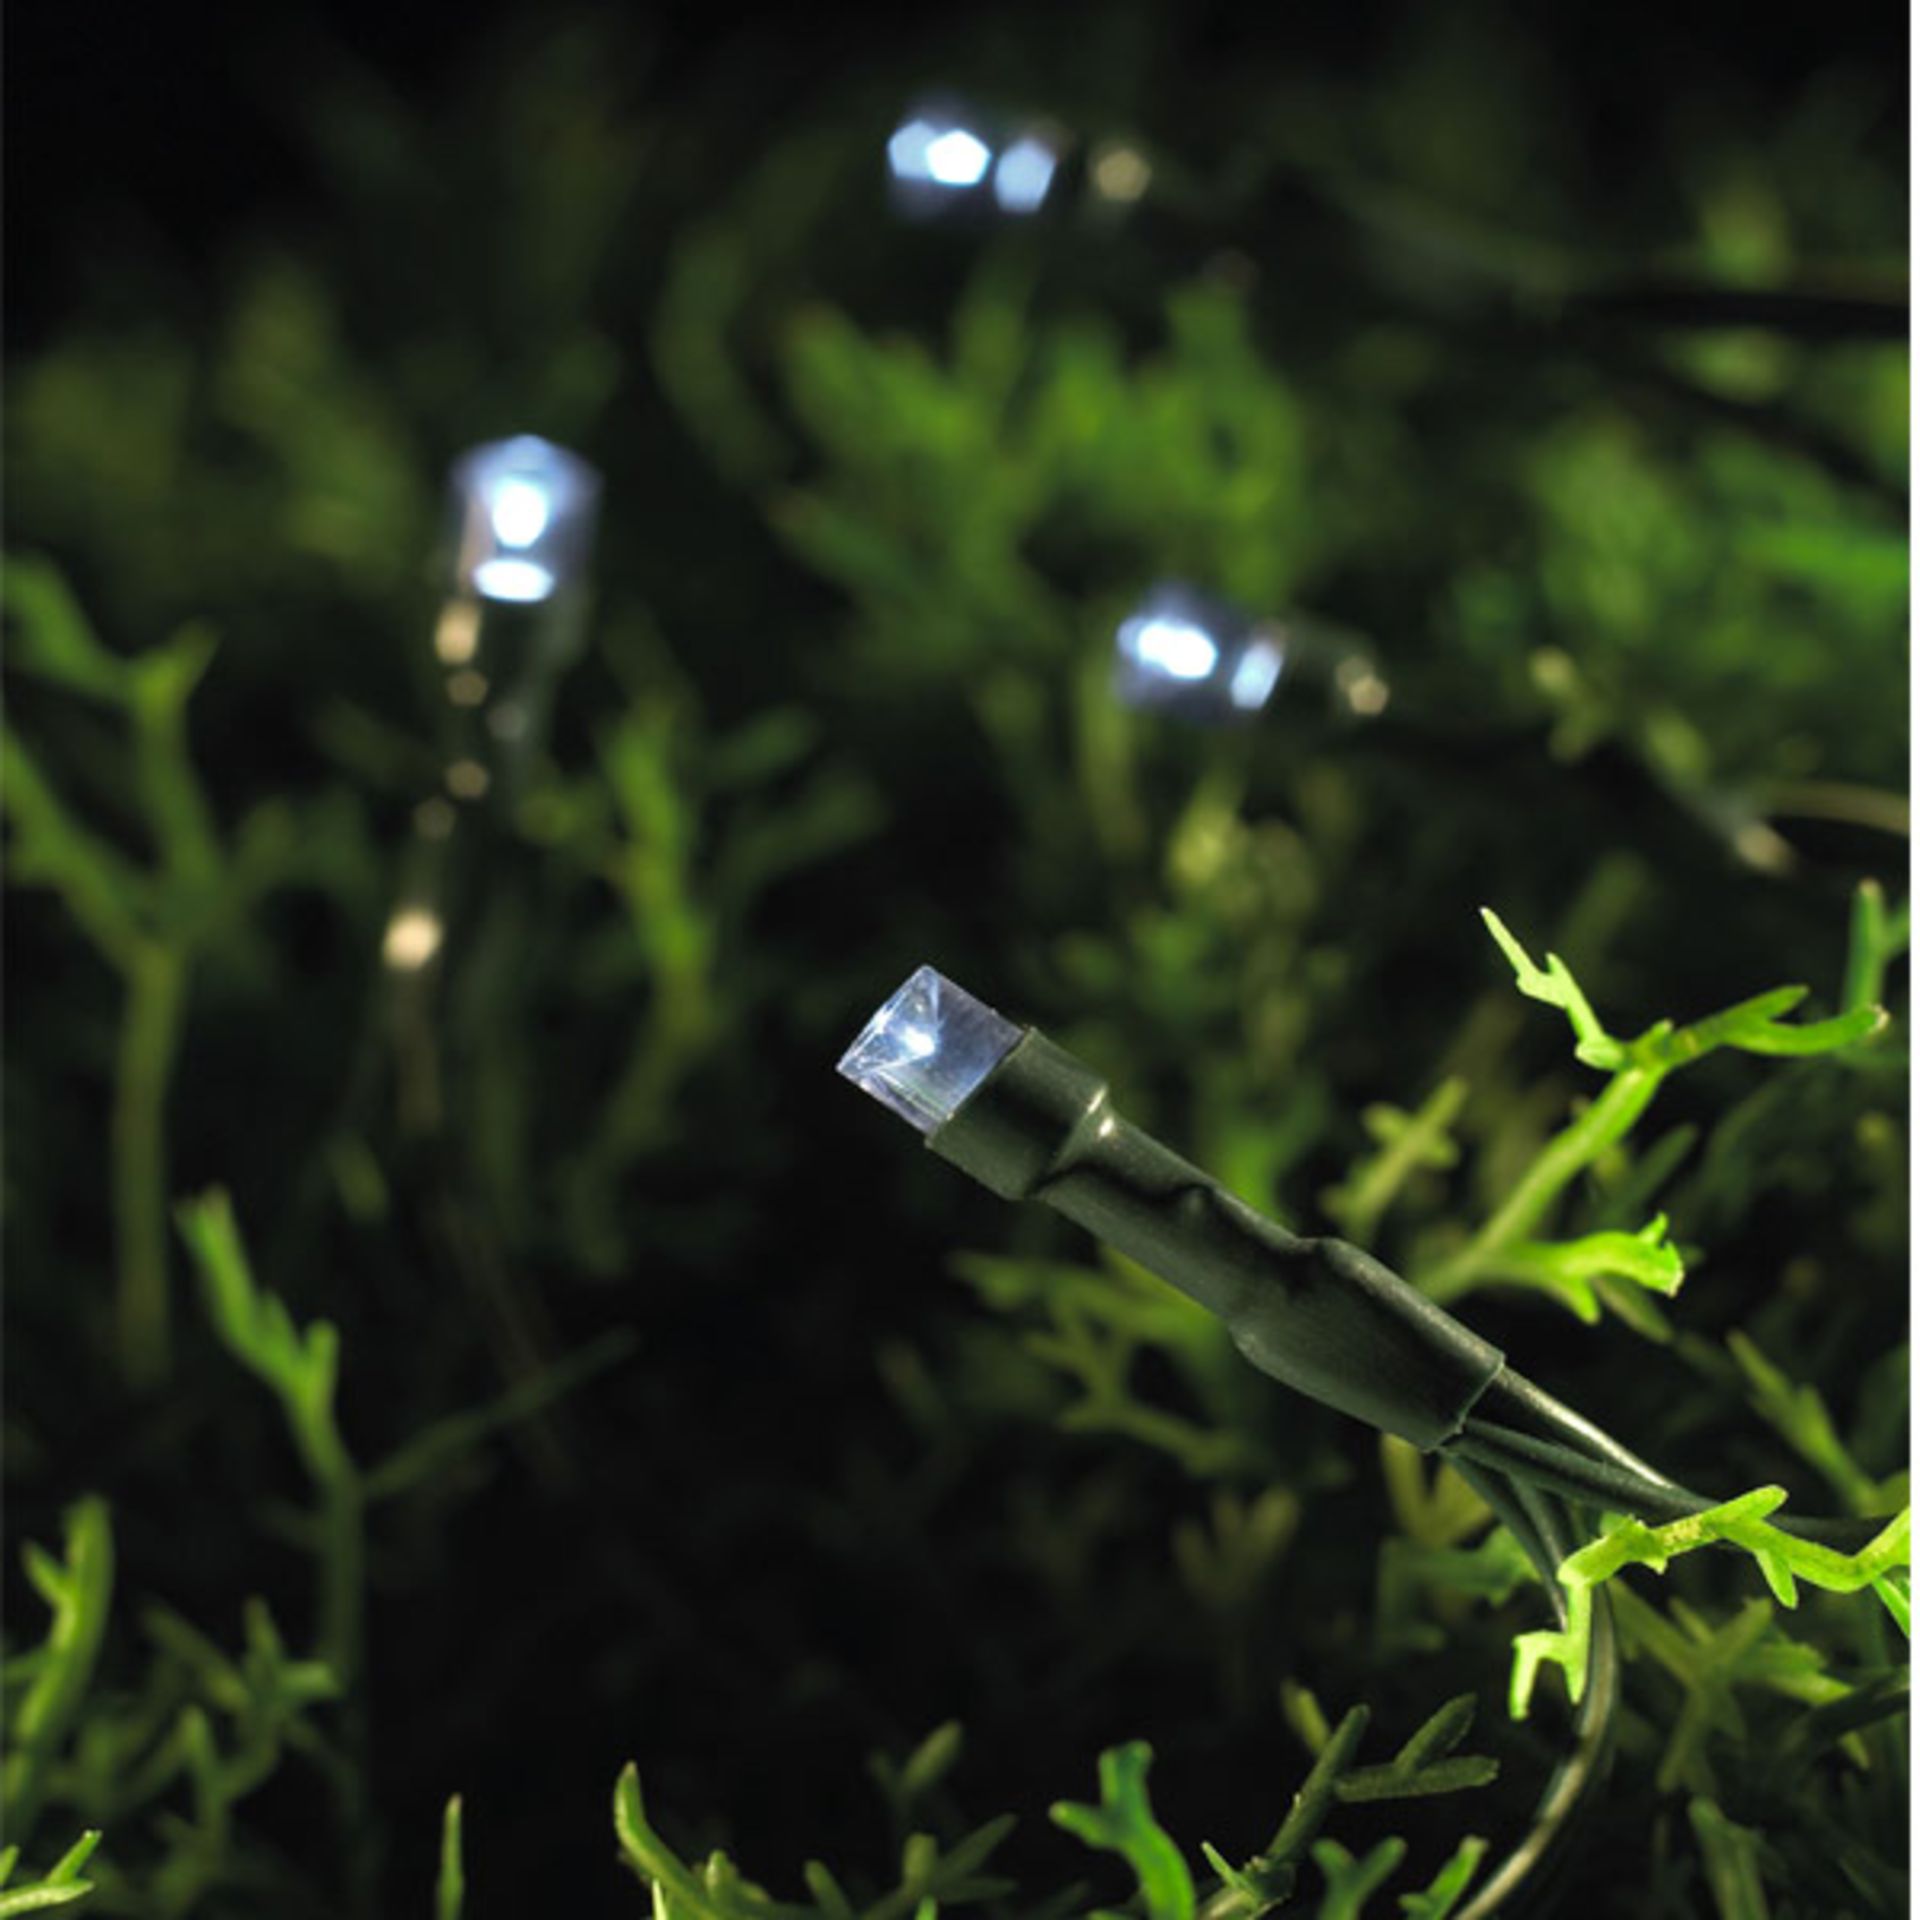 V Brand New Set Of 50 Solar Powered String Lights - Come on At Dusk & Off At Dawn X 2 Bid price to - Image 2 of 2